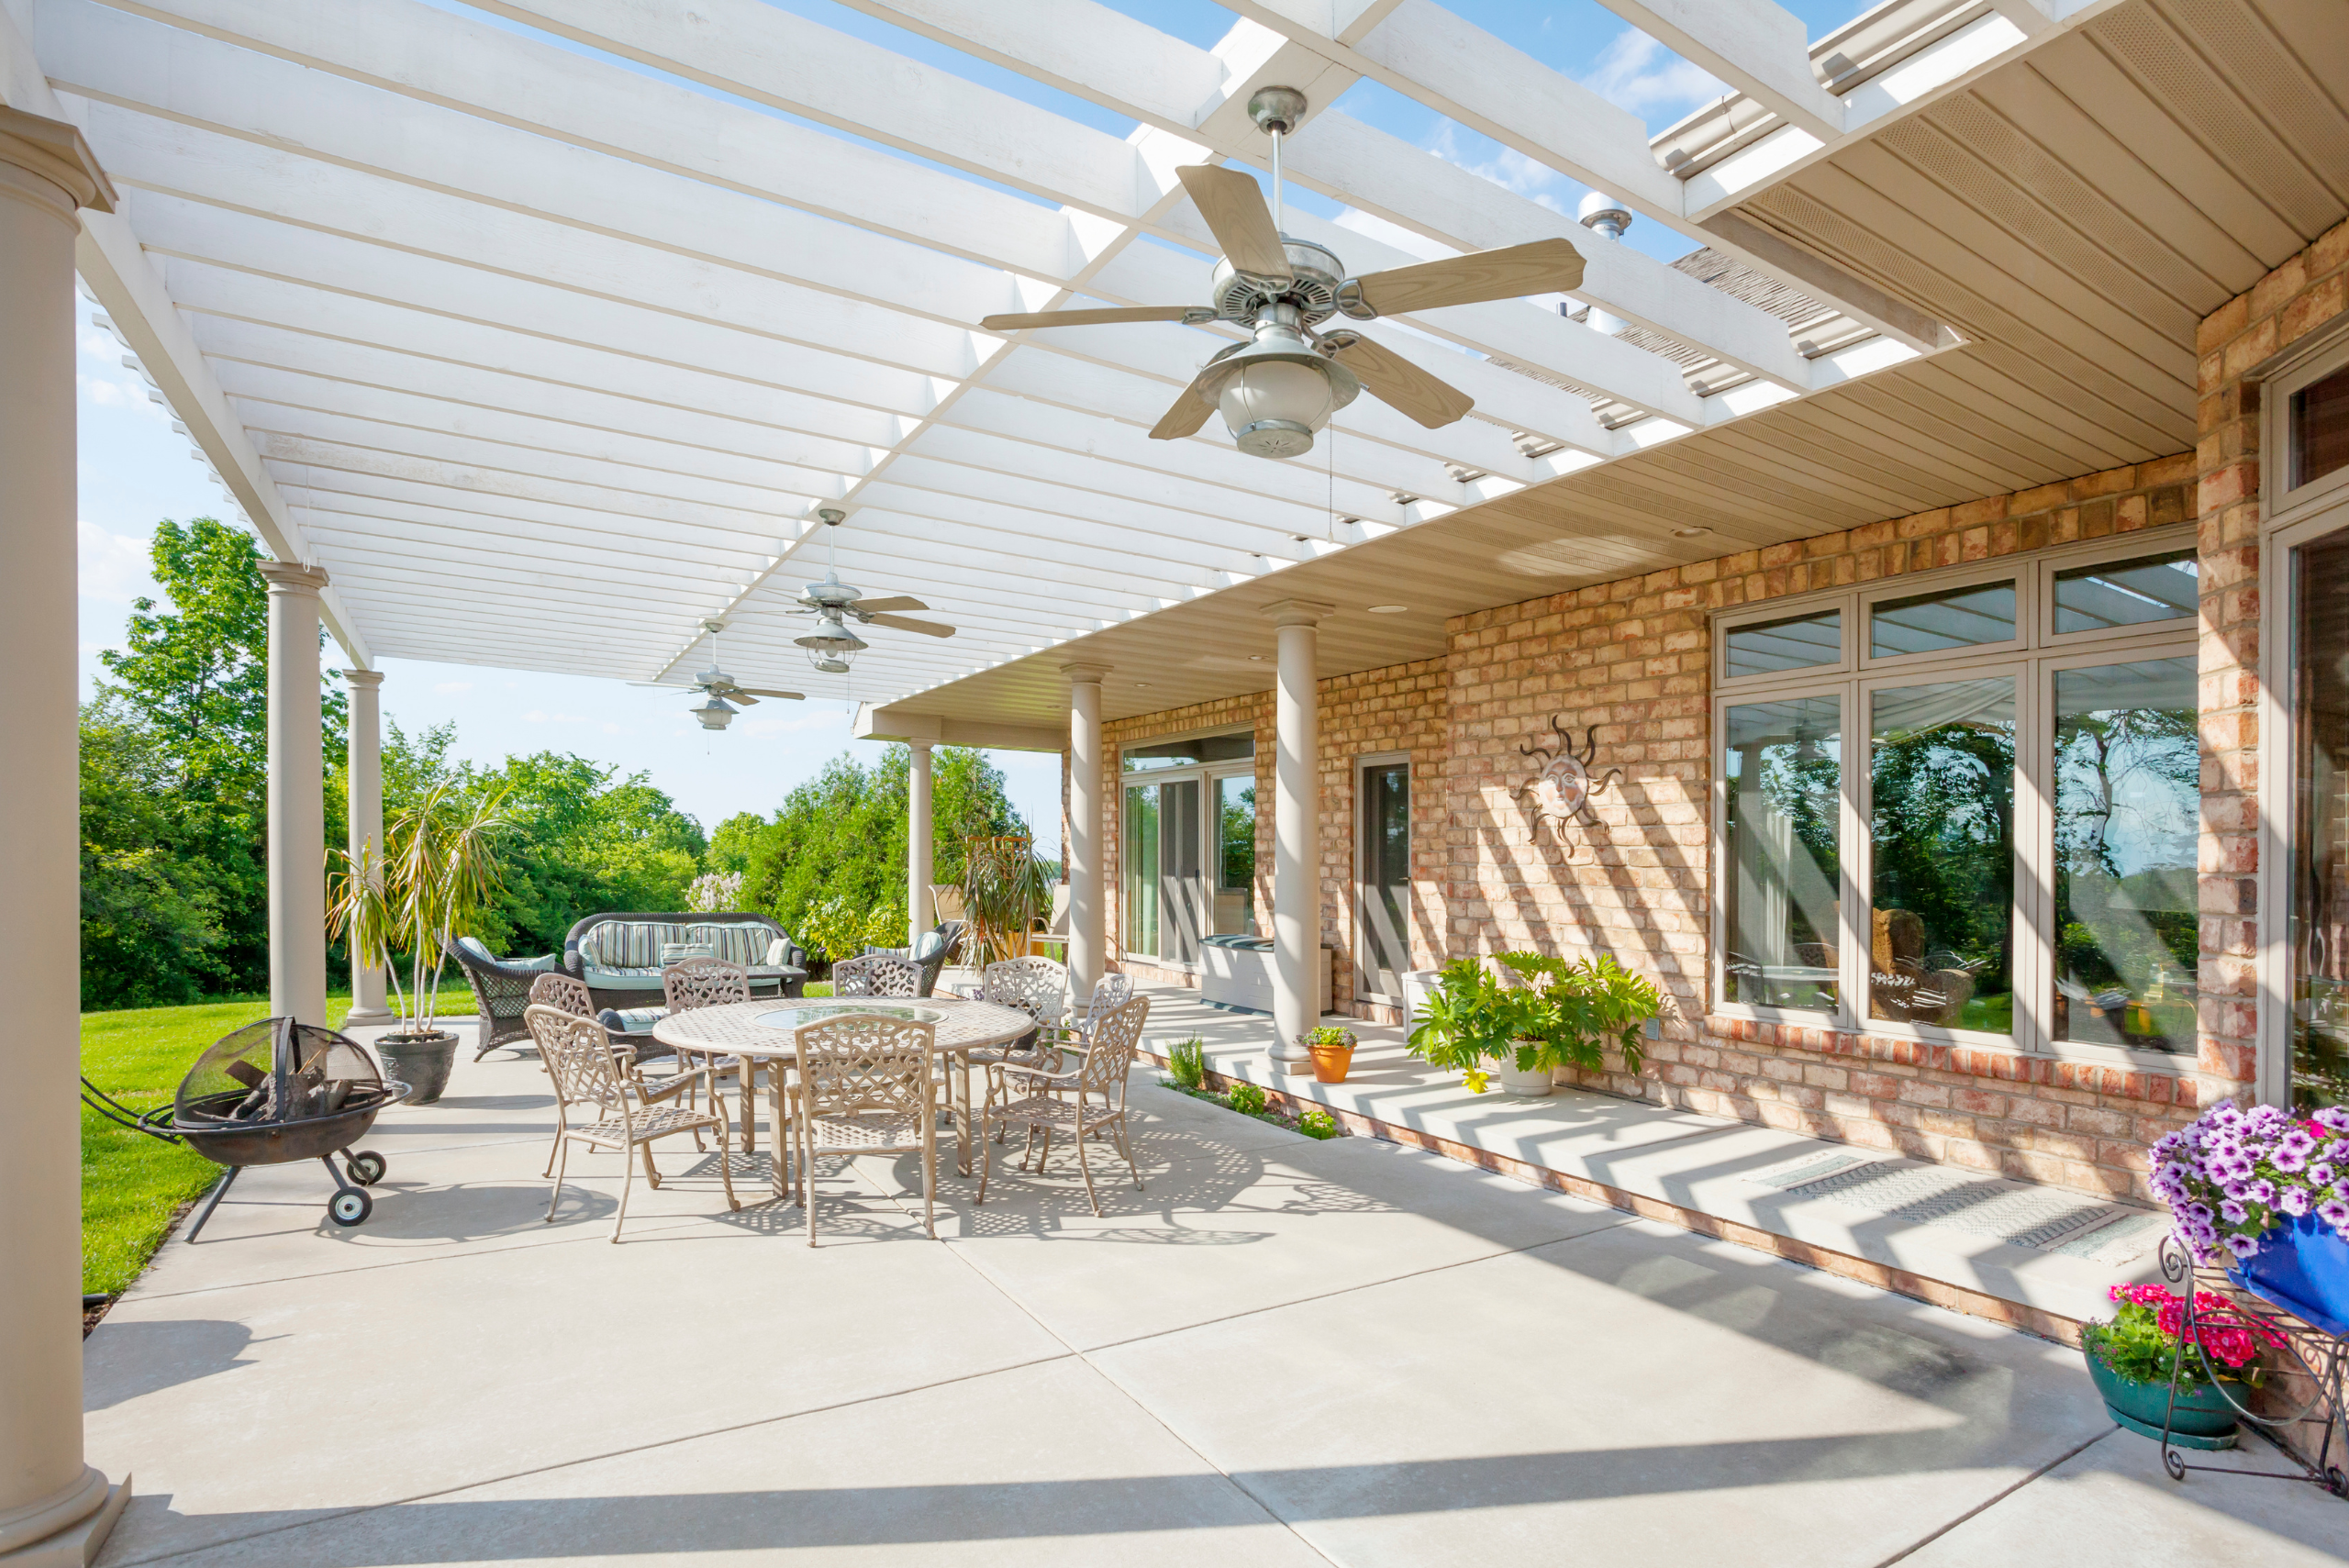 Backyard pergola attached to the house and mounts outdoor fans.